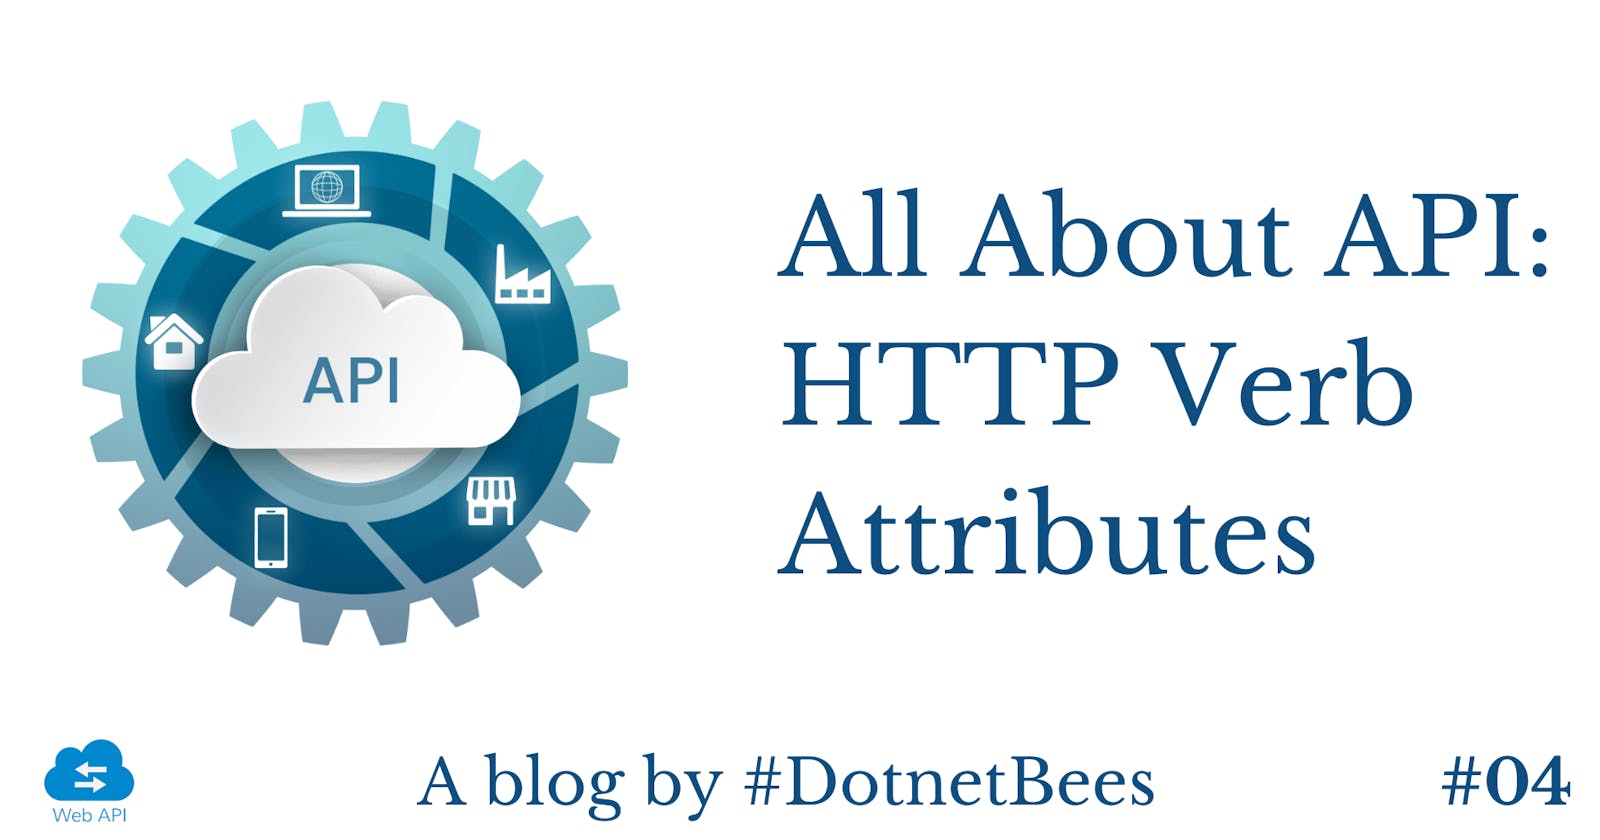 All About API: HTTP Verb Attributes